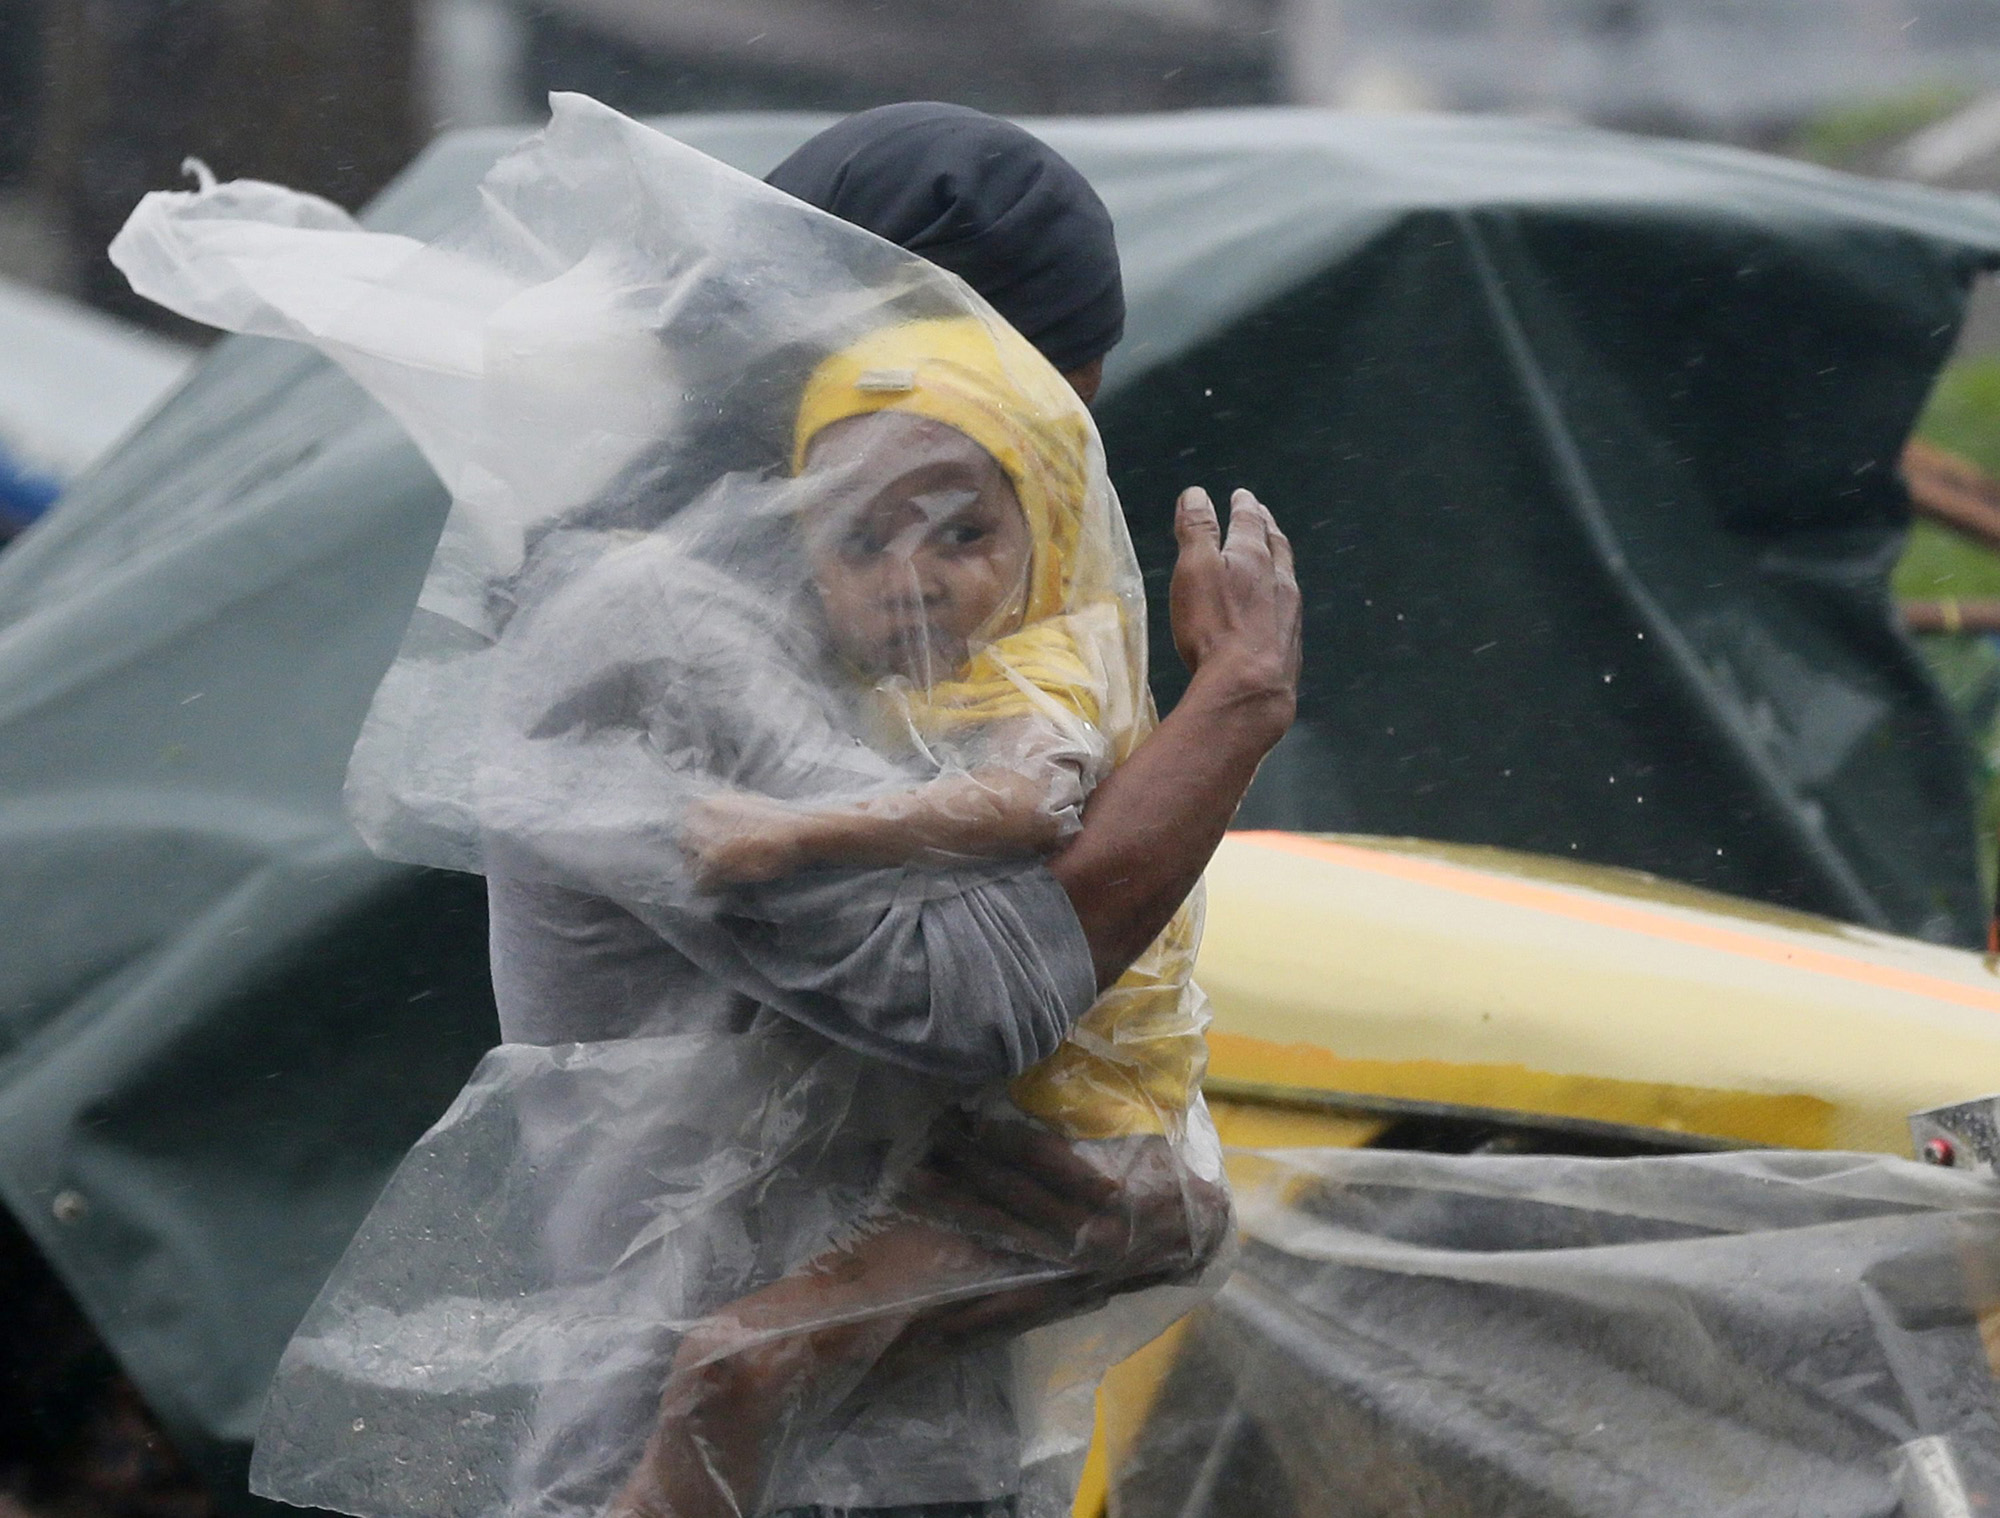 A Filipino father with his child covered under a plastic sheet flee the strong winds and rain brought by typhoon Rammasun in the Tondo slum area, in Manila, Philippines, July 16, 2014.